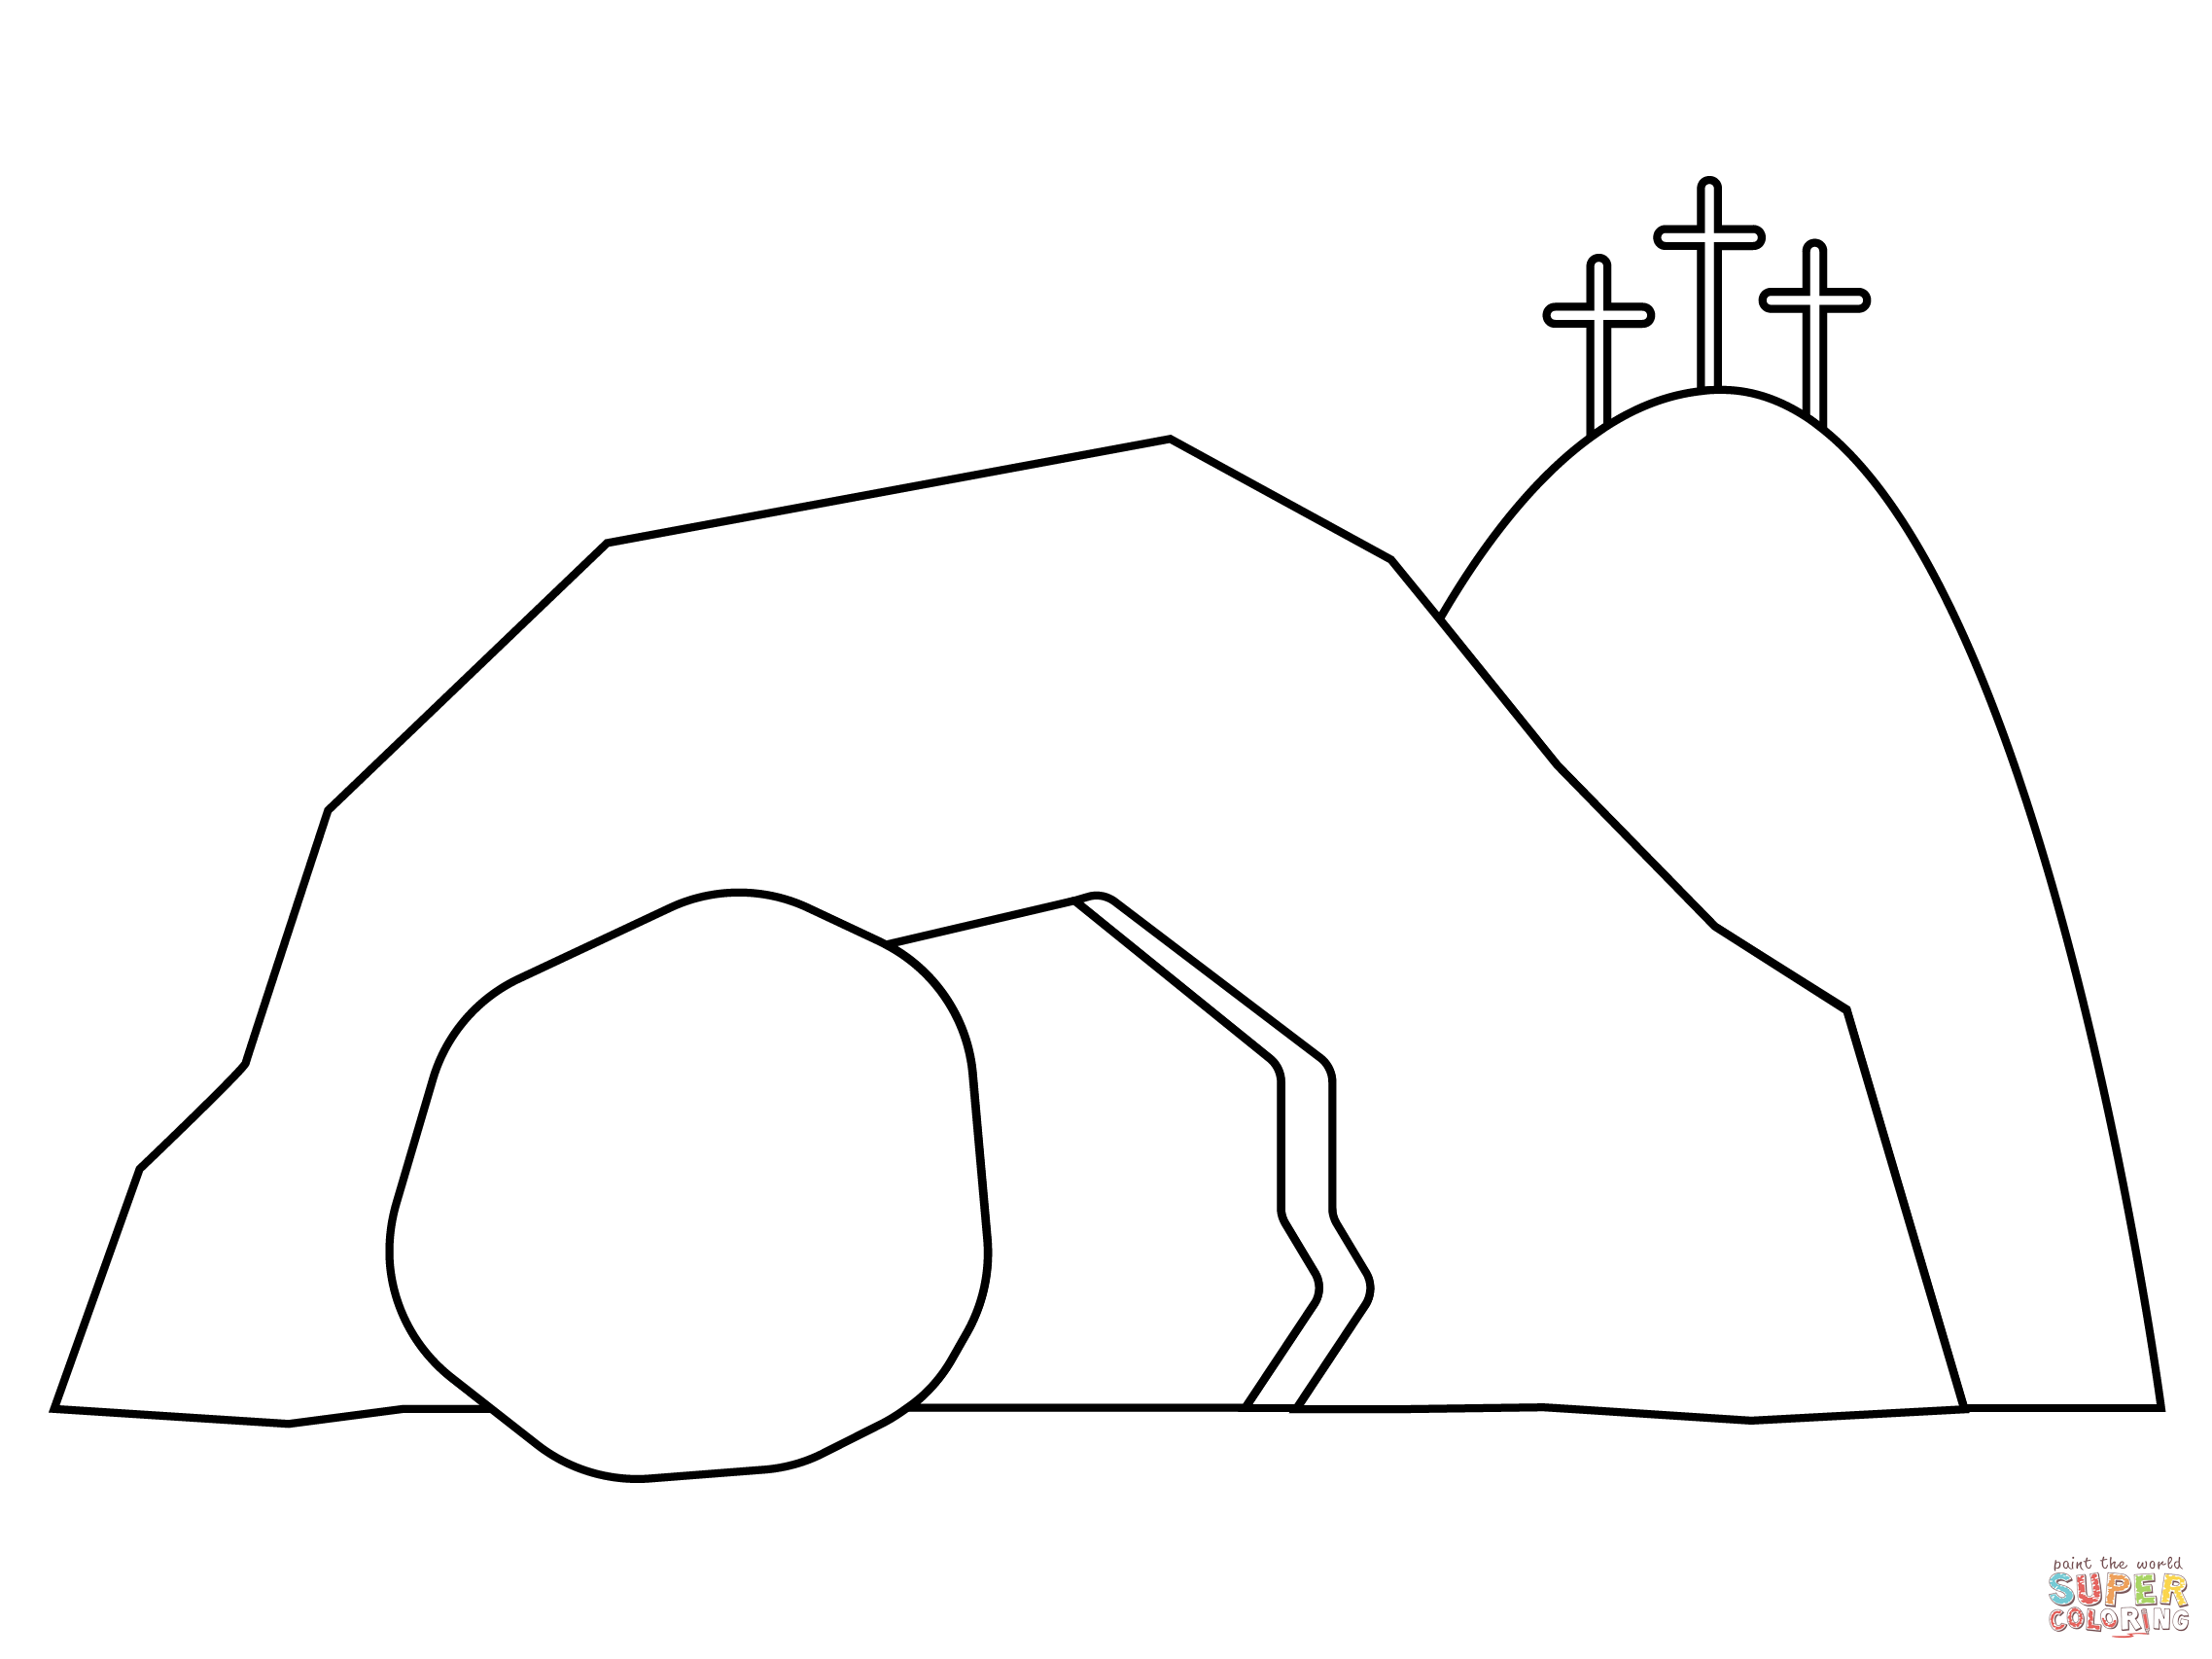 Jesus tomb coloring page free printable coloring pages